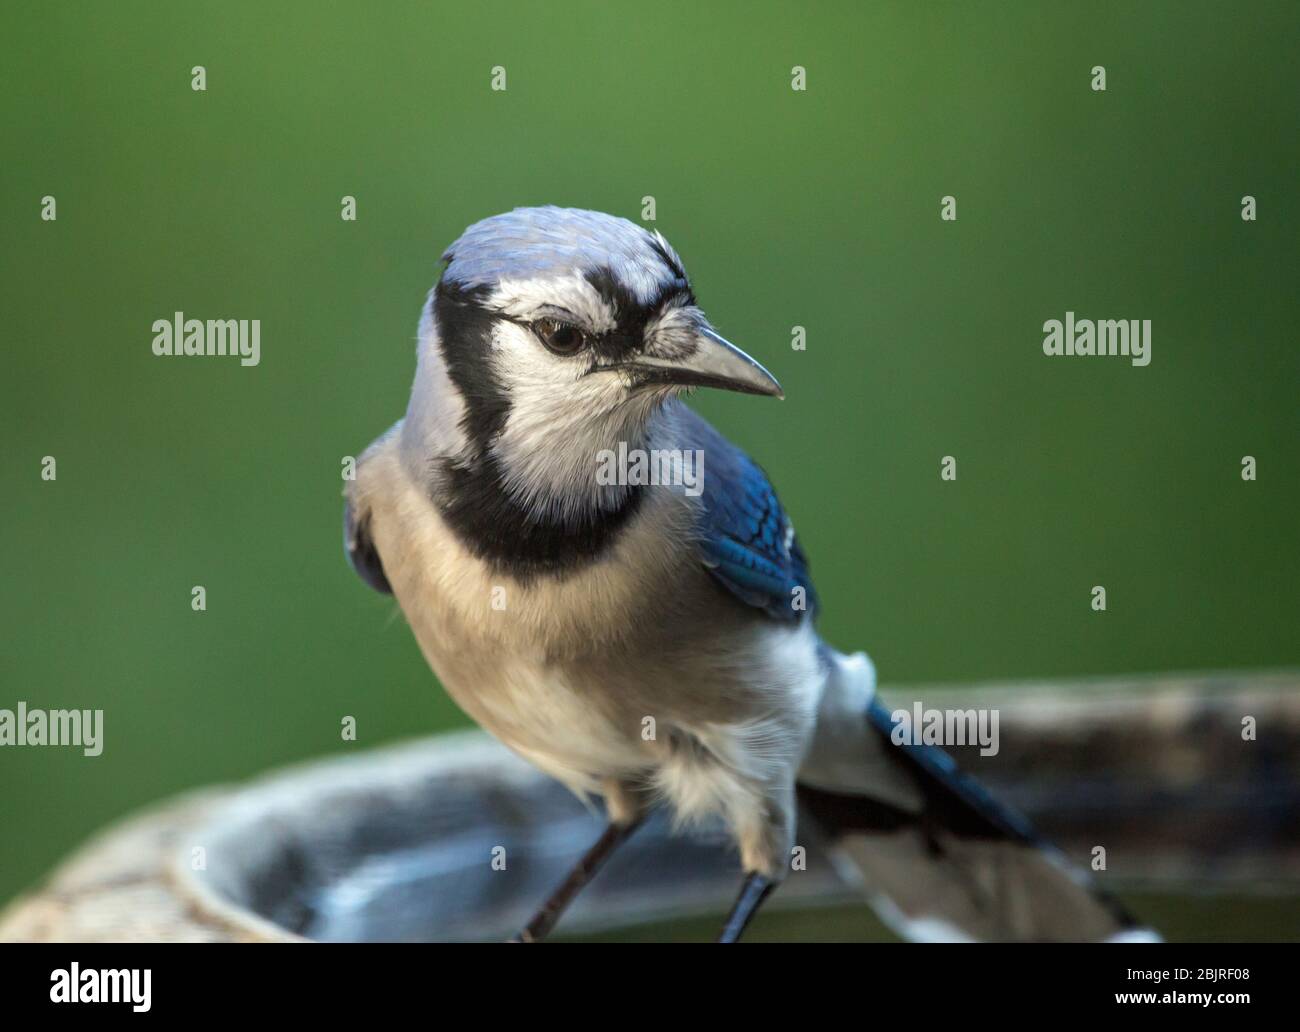 Closeup of a colorful blue jay bird perched on a bird bath with dark green background. Stock Photo